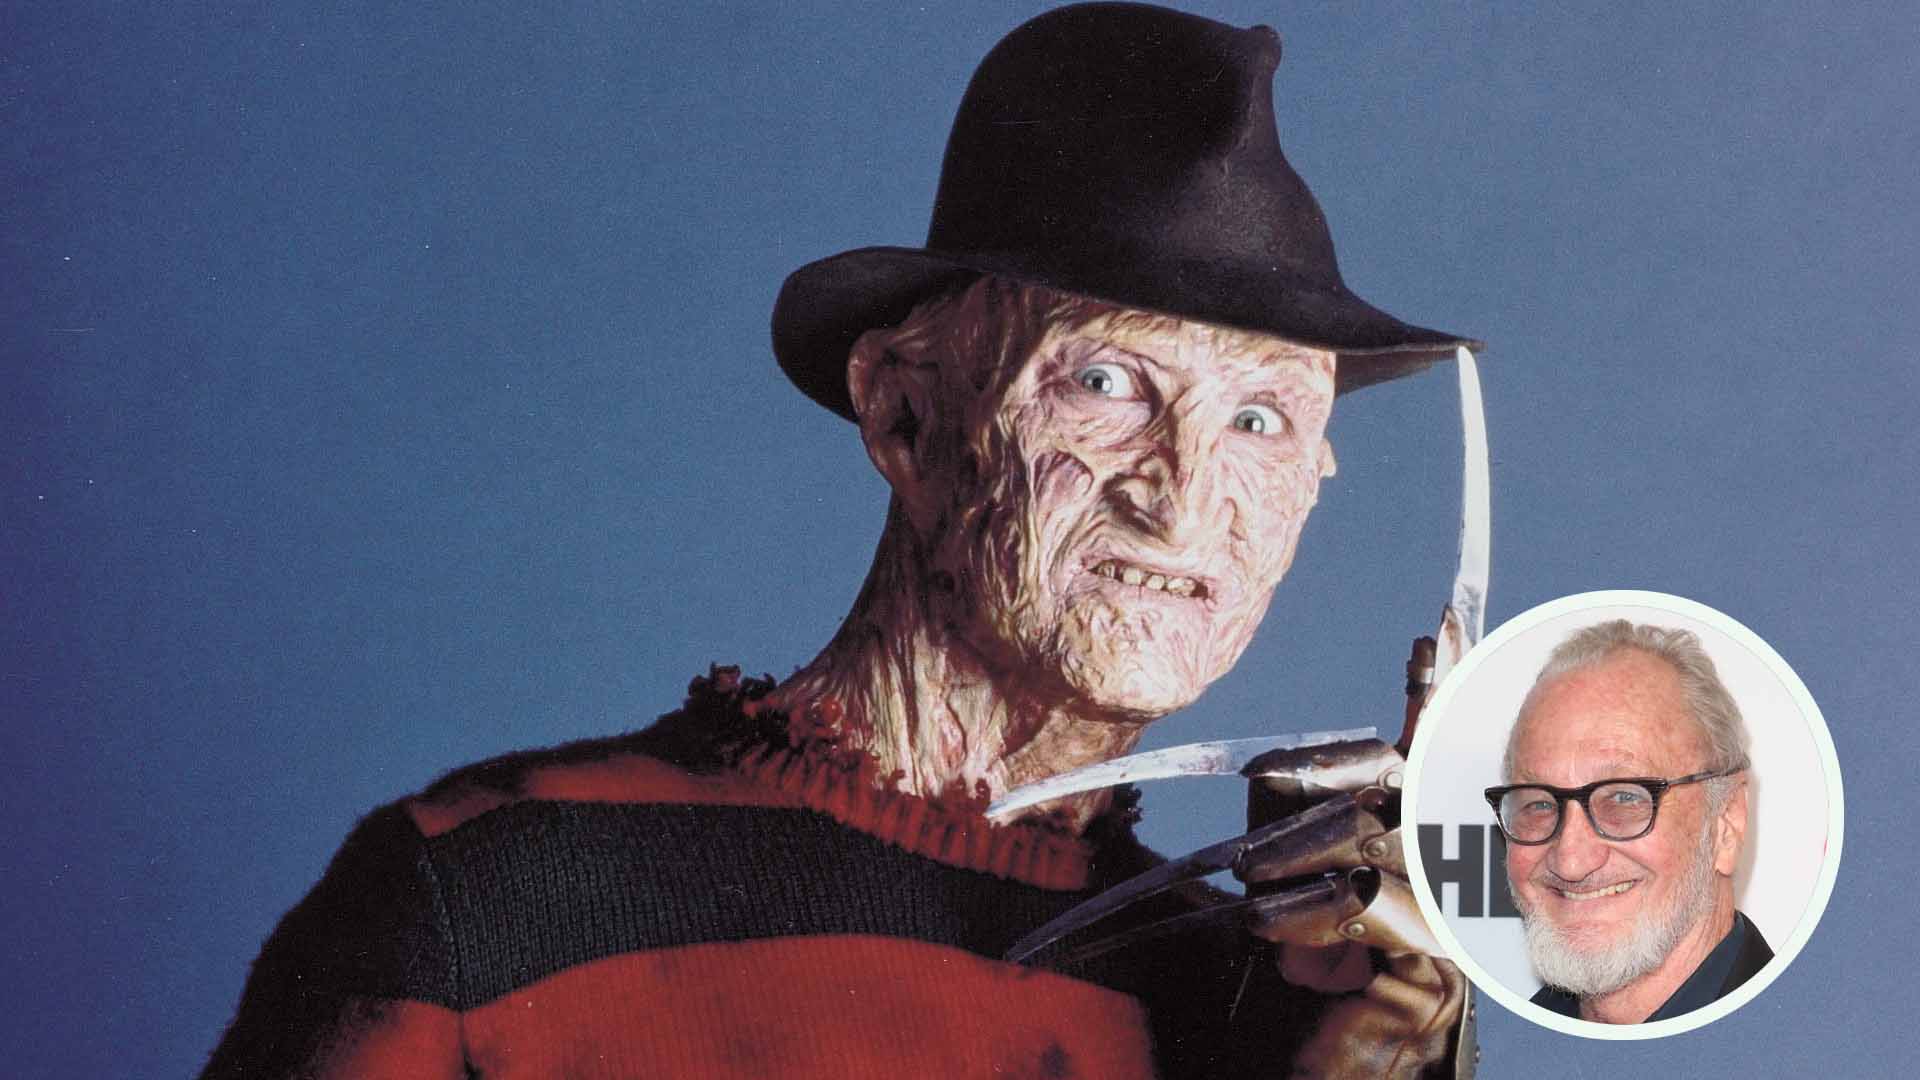 The disgusting man most feared to return: Who is Freddy Krueger?